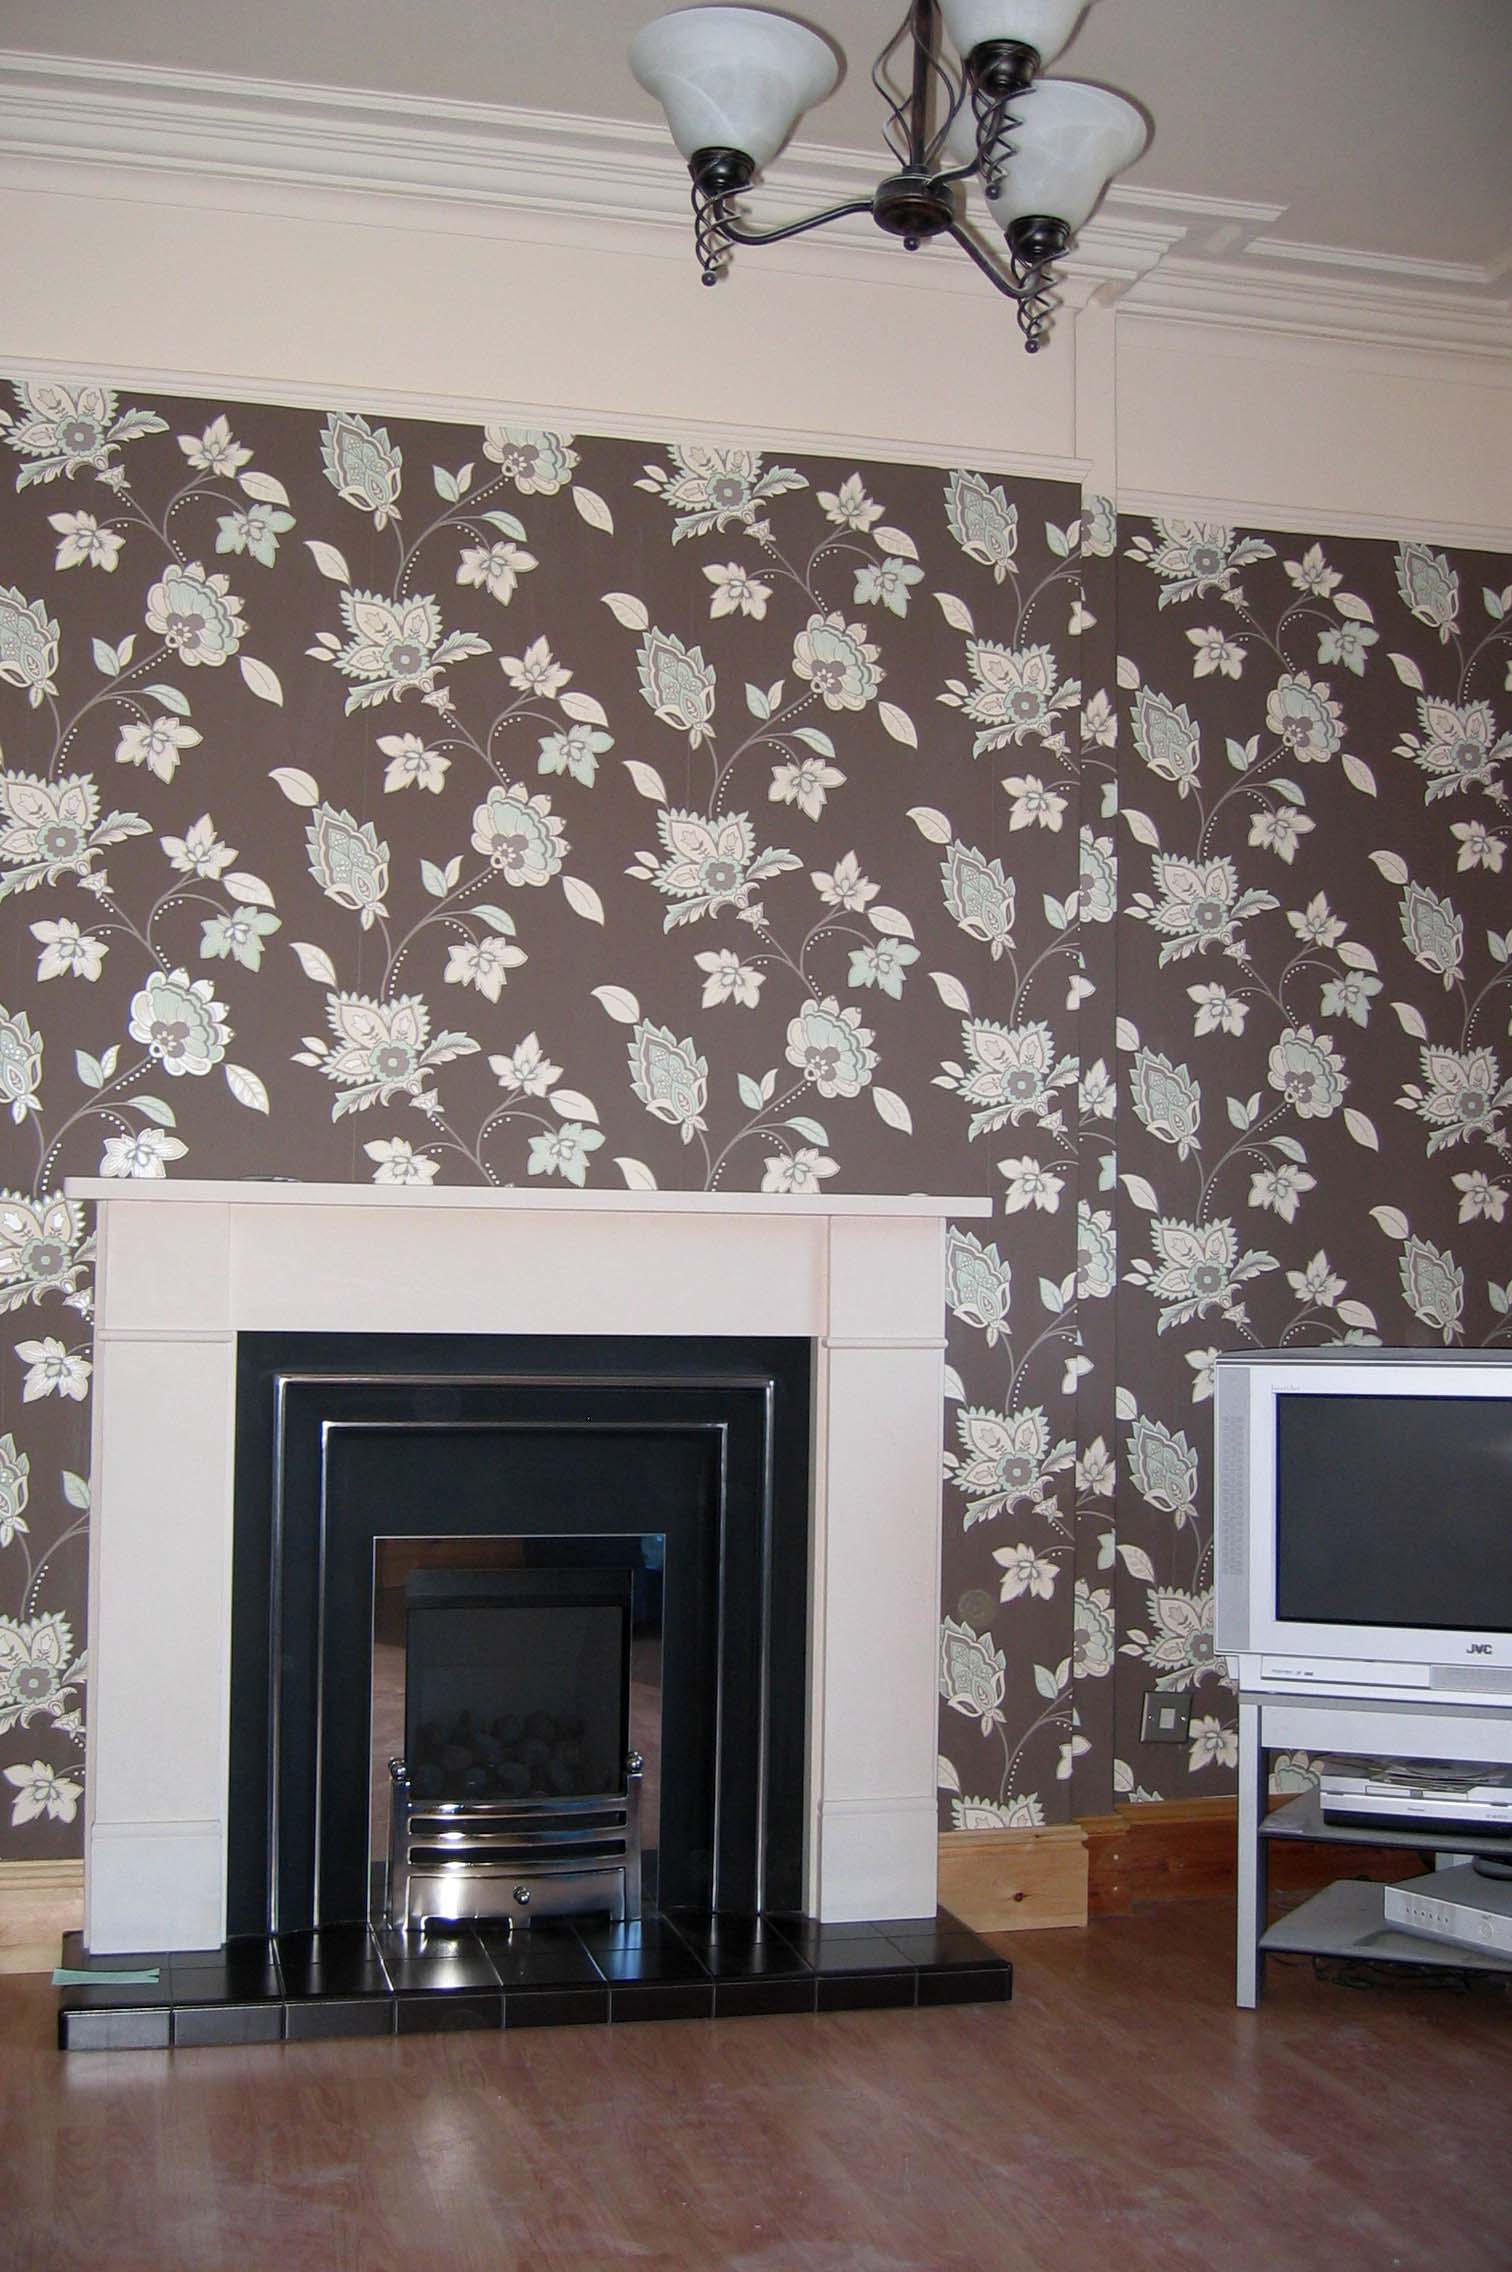  with a funky feature wall, so apart from furniture and curtains we are 